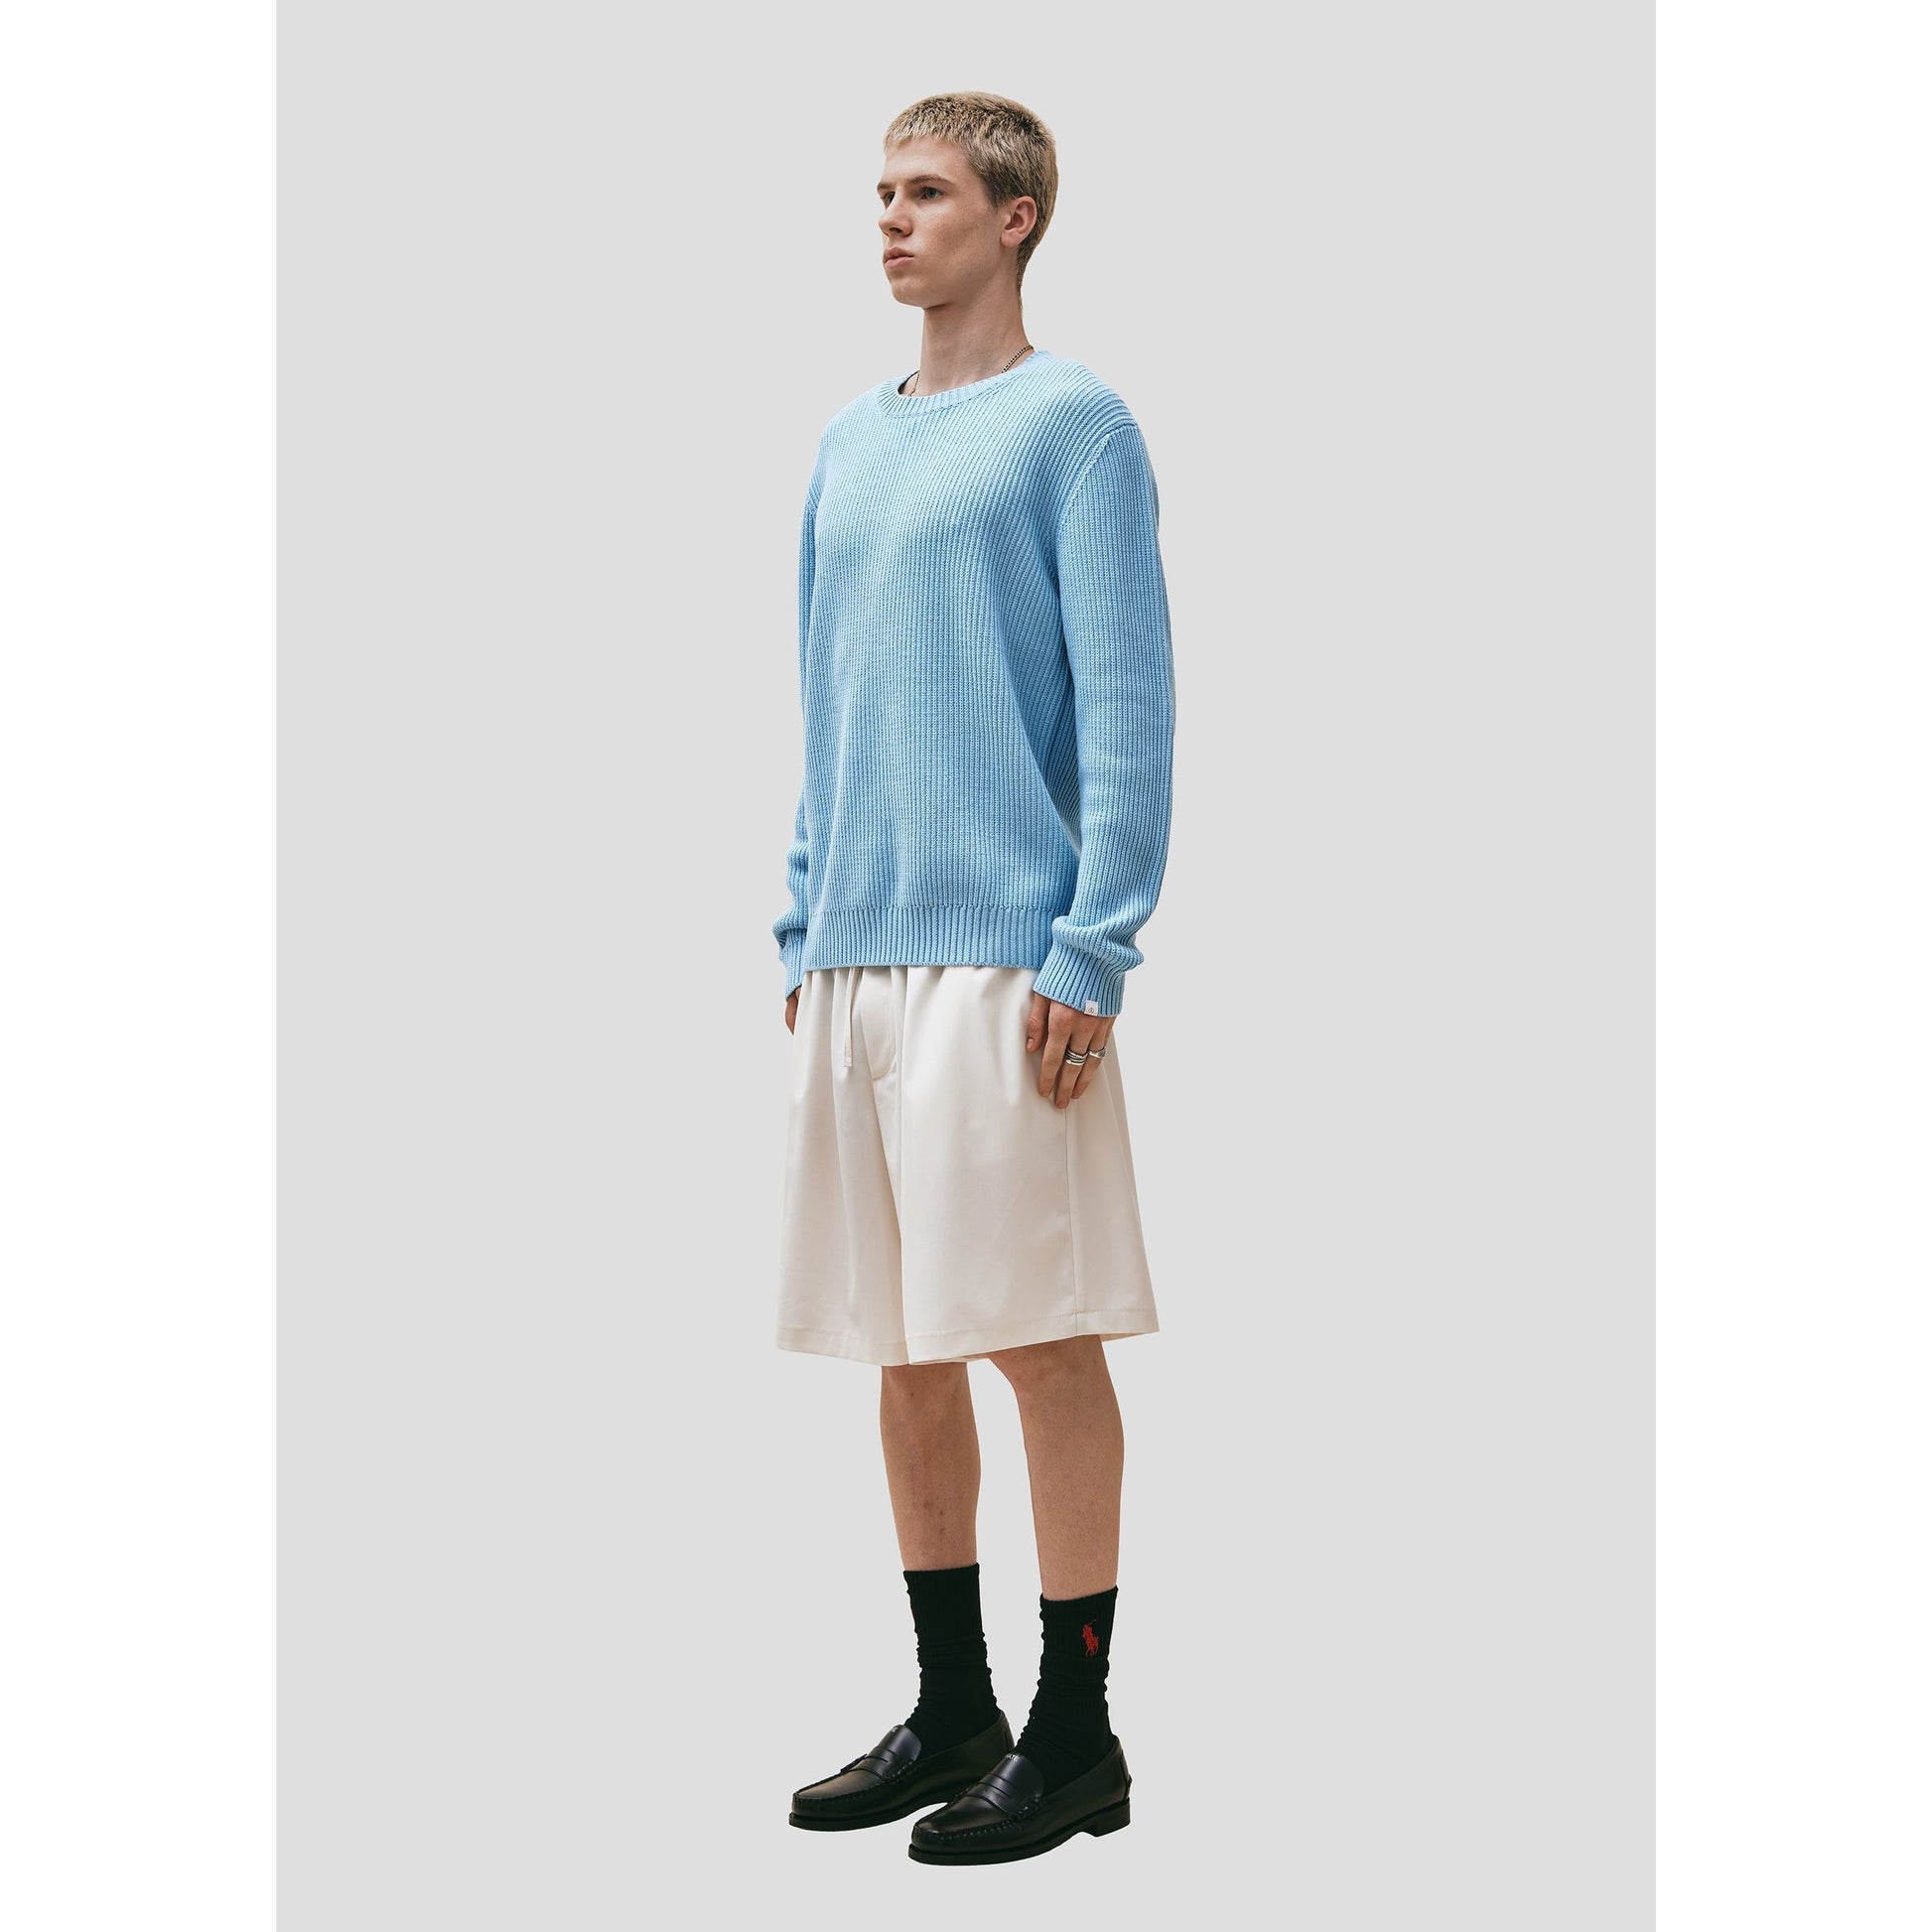 A young man standing in a studio wearing a Wool Cotton Crewneck Sweater from Seven Gauge, beige knee-length shorts, black socks, and black shoes.